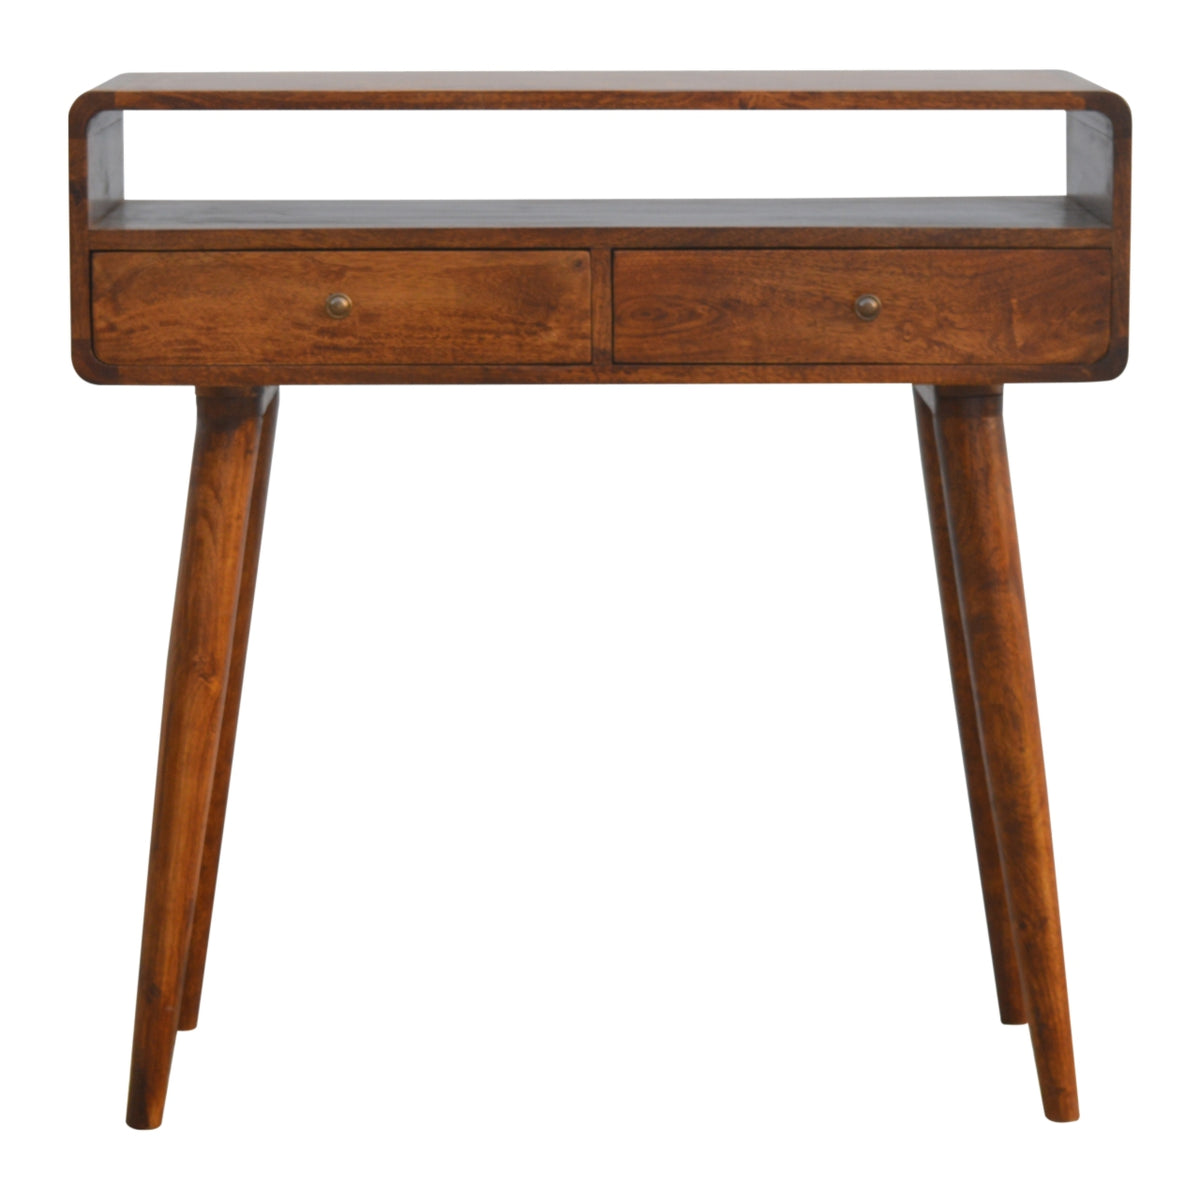 Mid Century Modern Console Table Console table near me uk dark wood 2 drawers for sale dark wood console table on sale